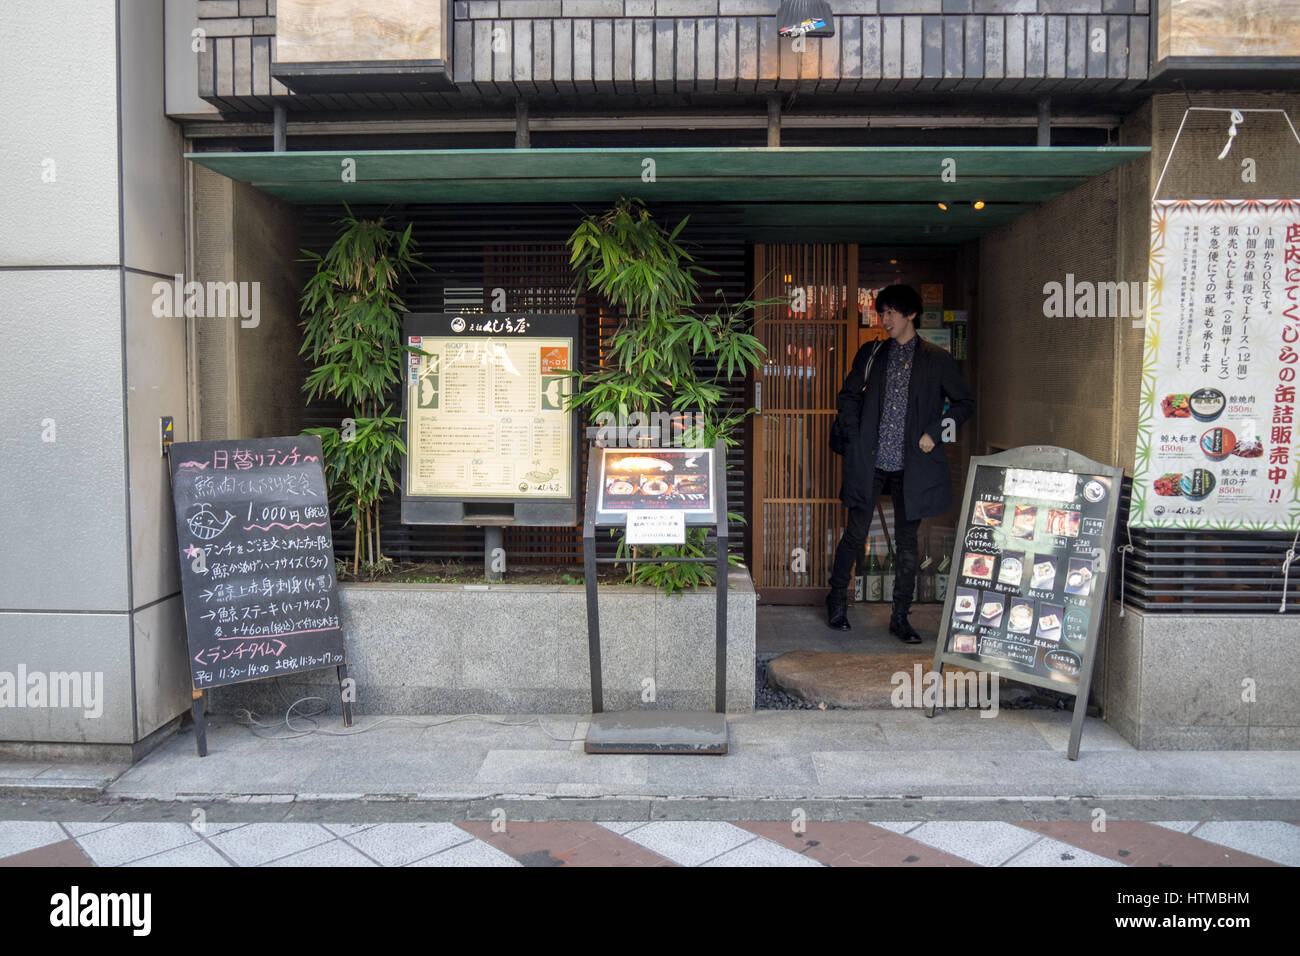 A man walking out of a restaurant which serves whale meat, in Shibuya Tokyo Japan. Stock Photo